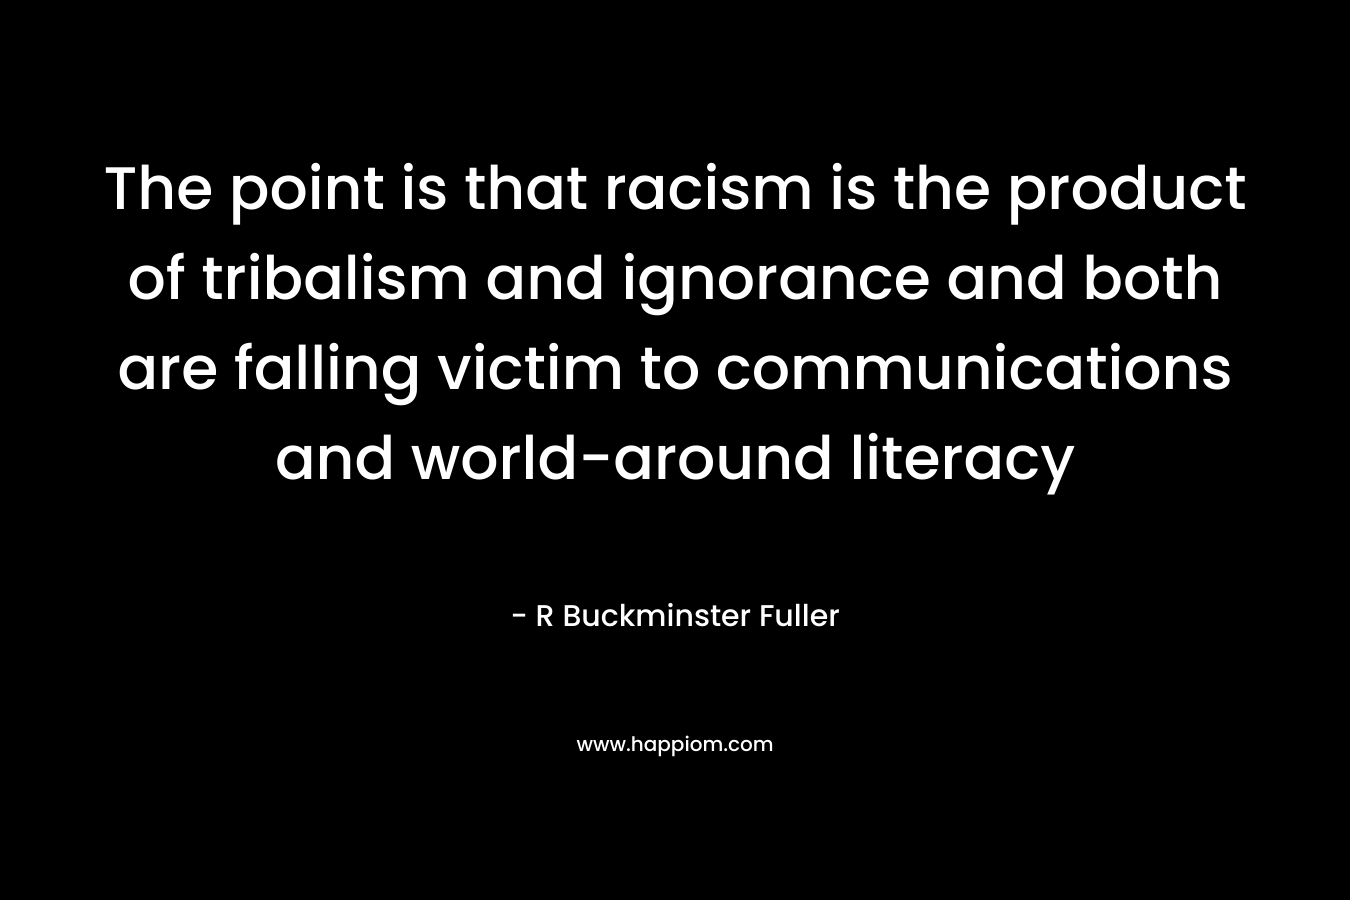 The point is that racism is the product of tribalism and ignorance and both are falling victim to communications and world-around literacy – R Buckminster Fuller